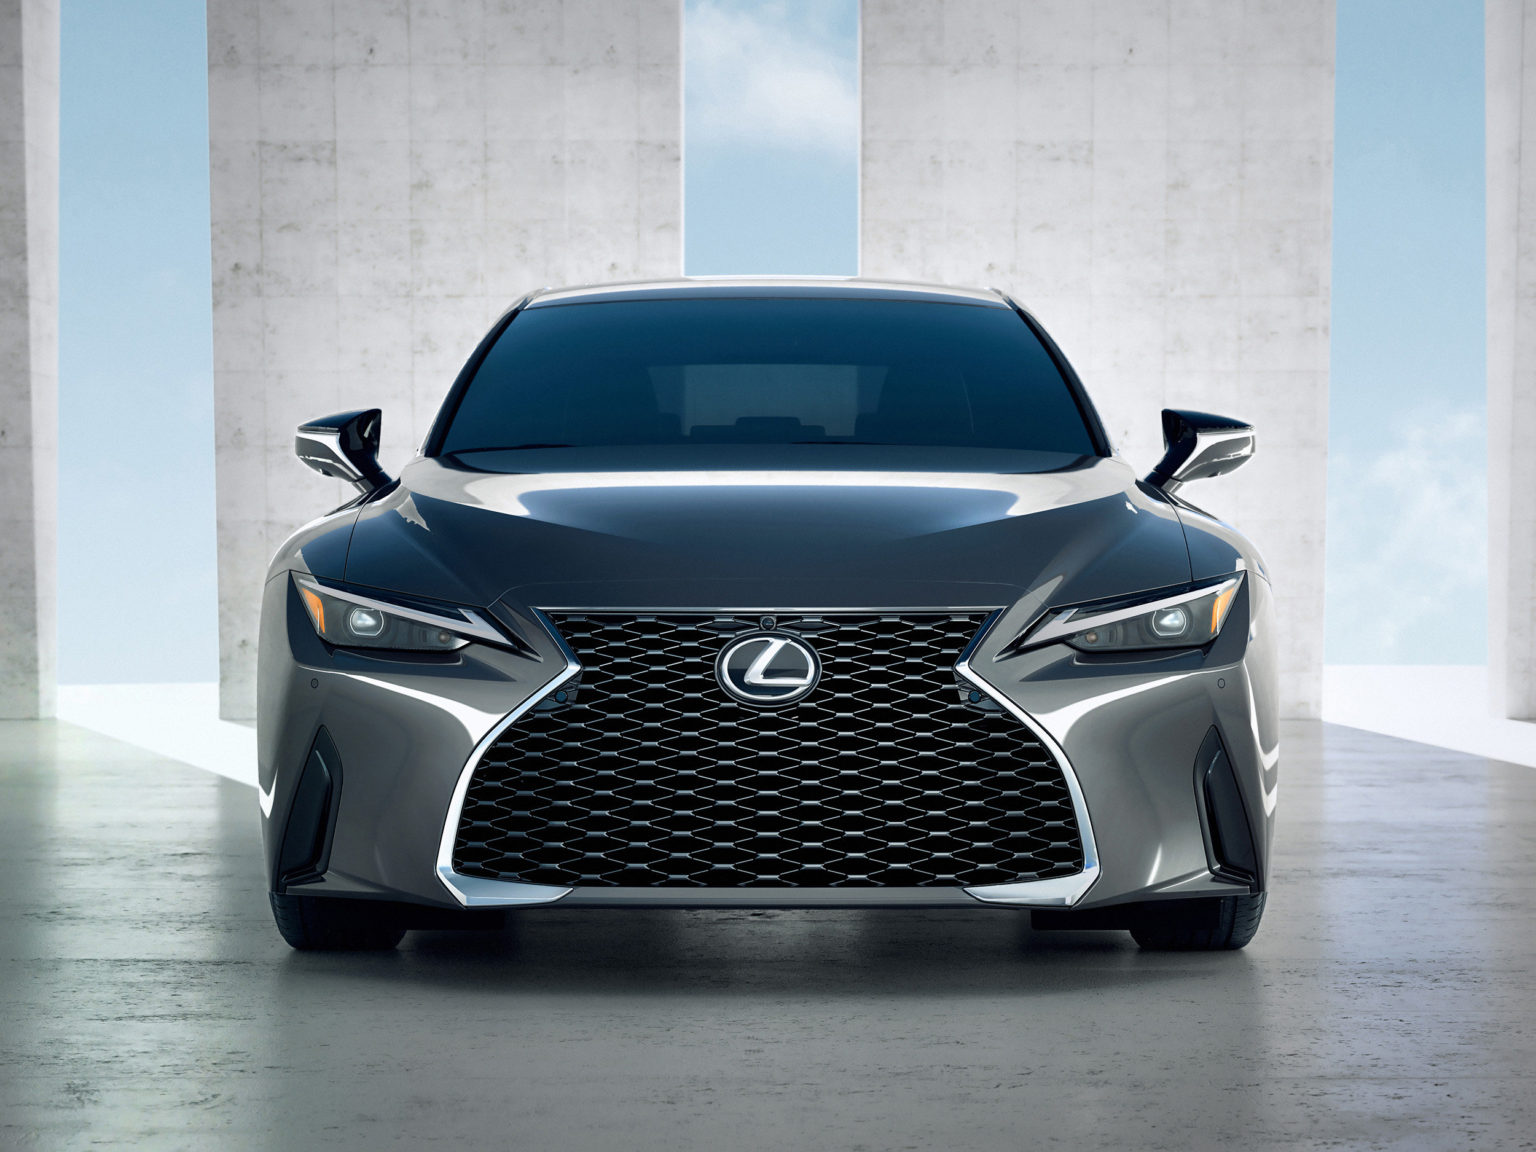 Lexus gas completely redesigned the IS sedan for the 2021 model year.